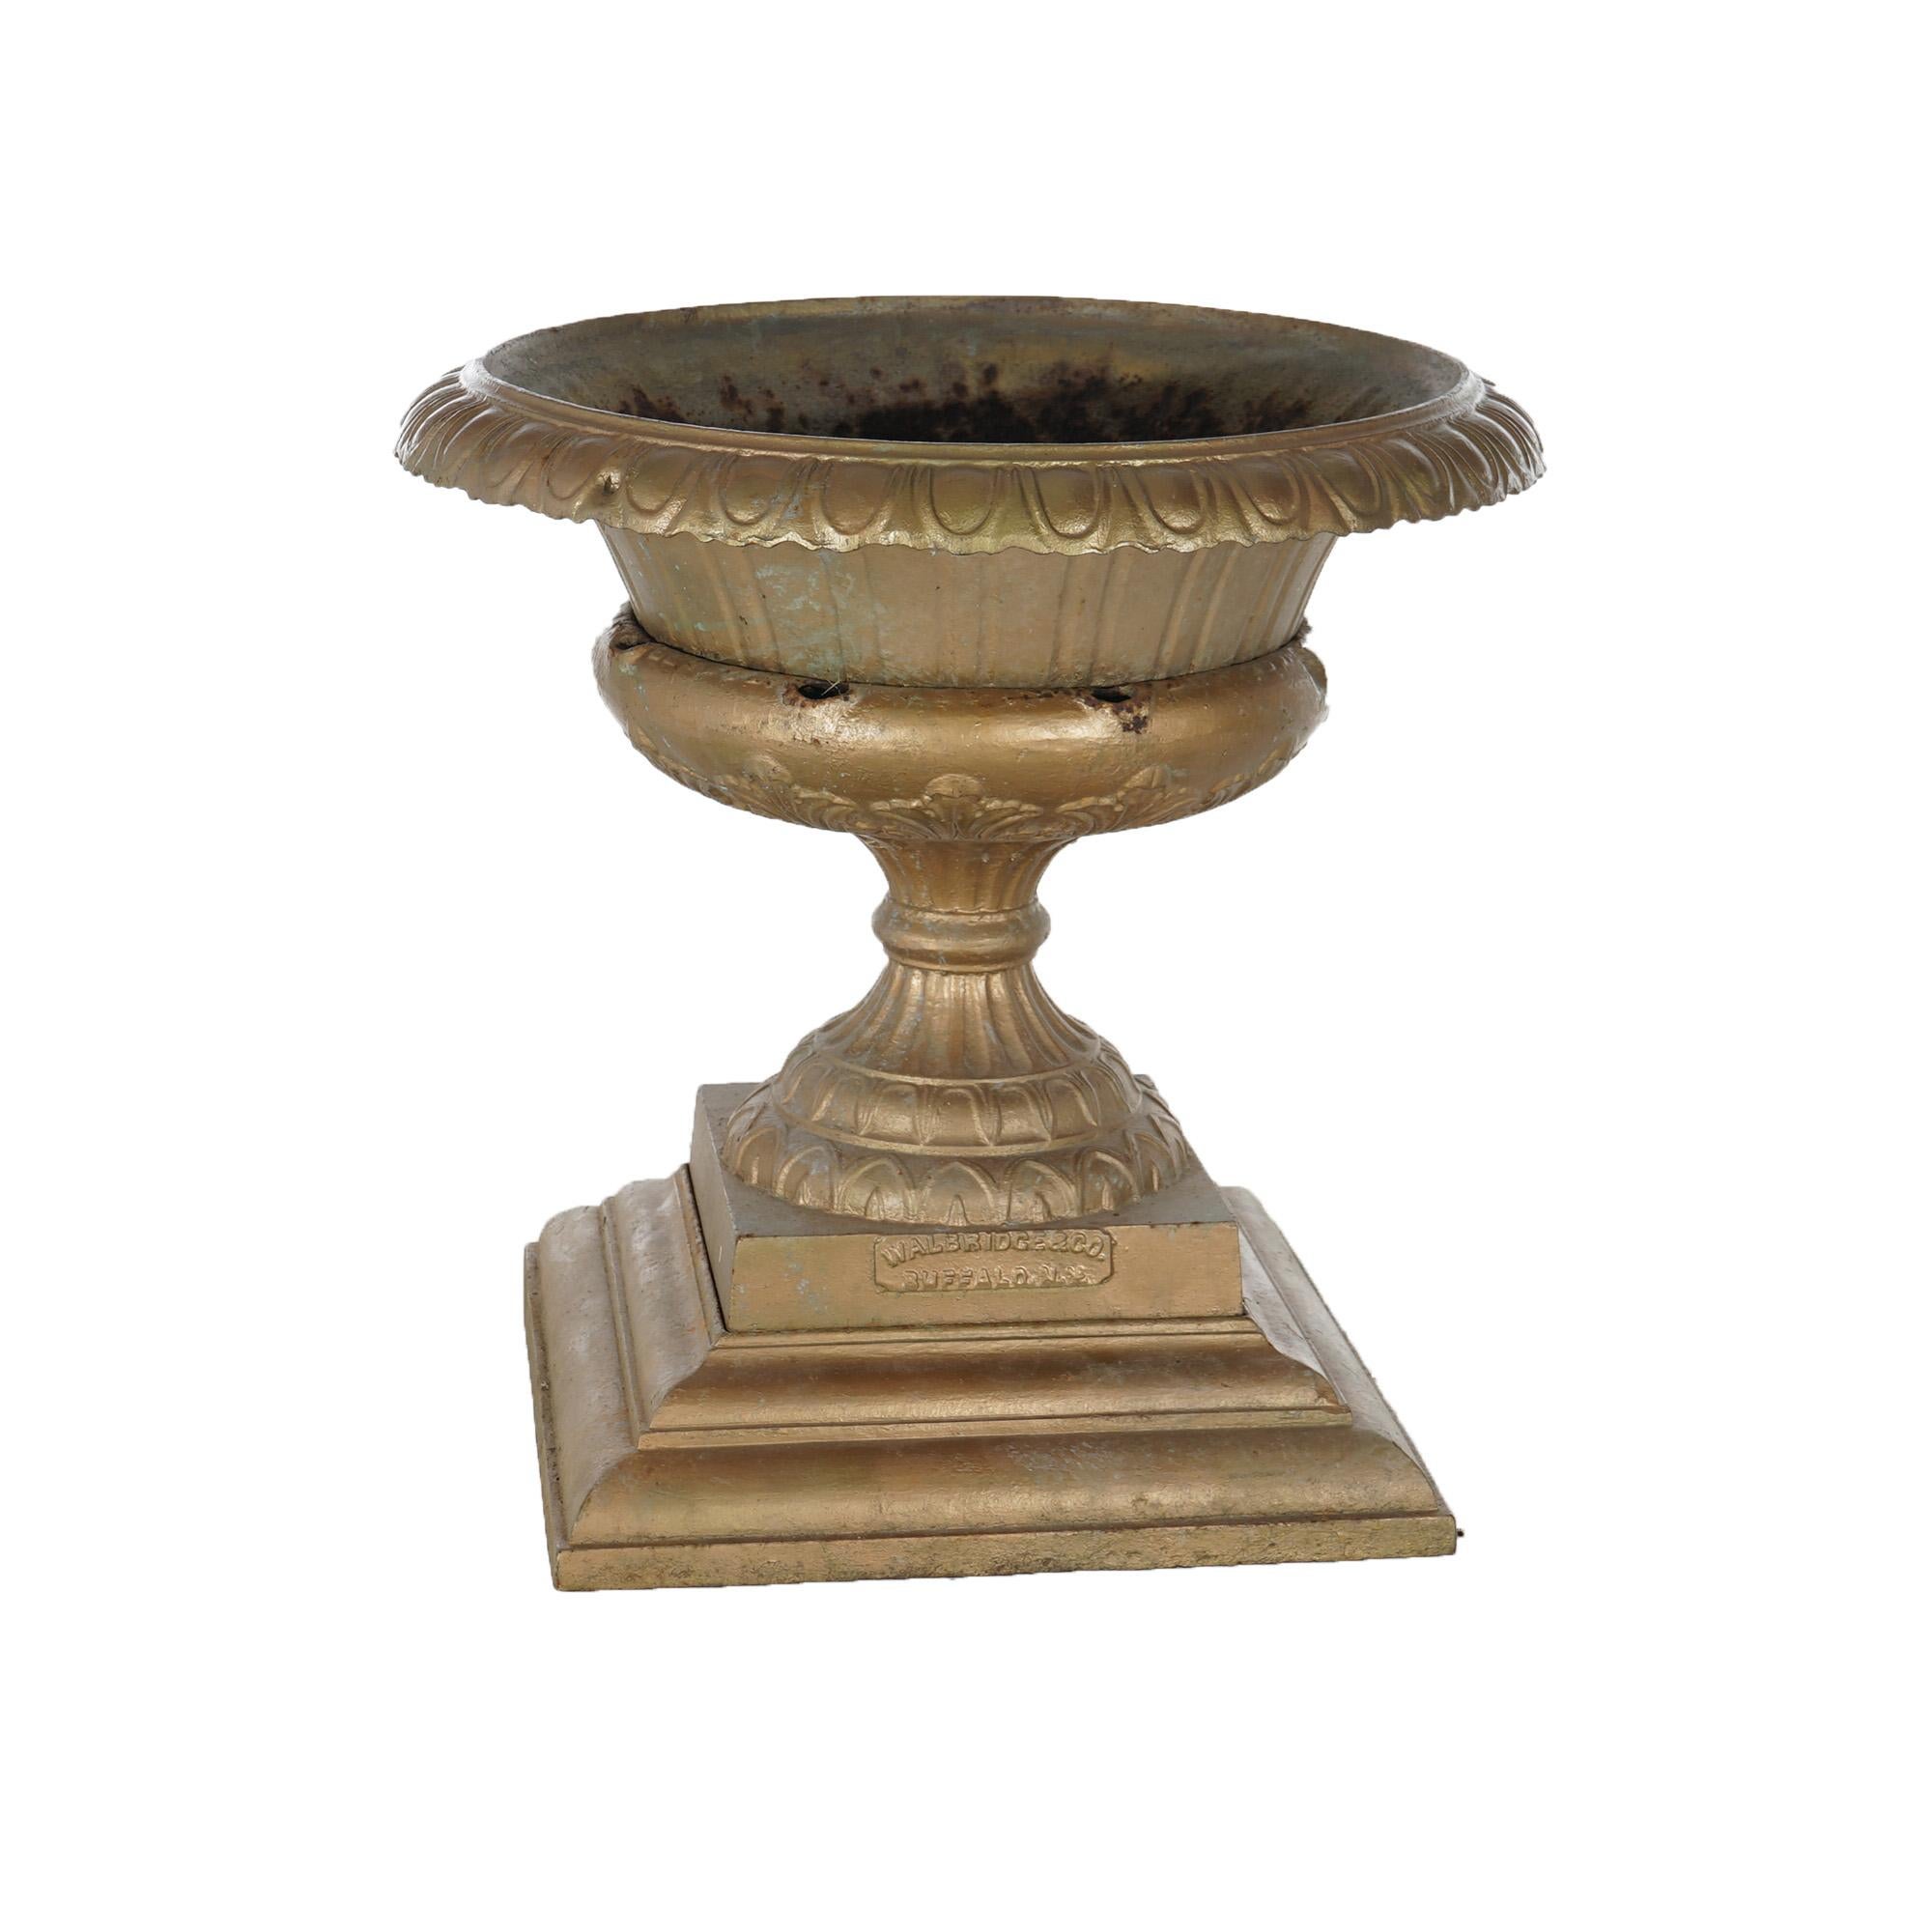 Classical Greek Oversized Antique Cast Iron Garden Urn by Walbridge & Co, Painted, Circa 1890